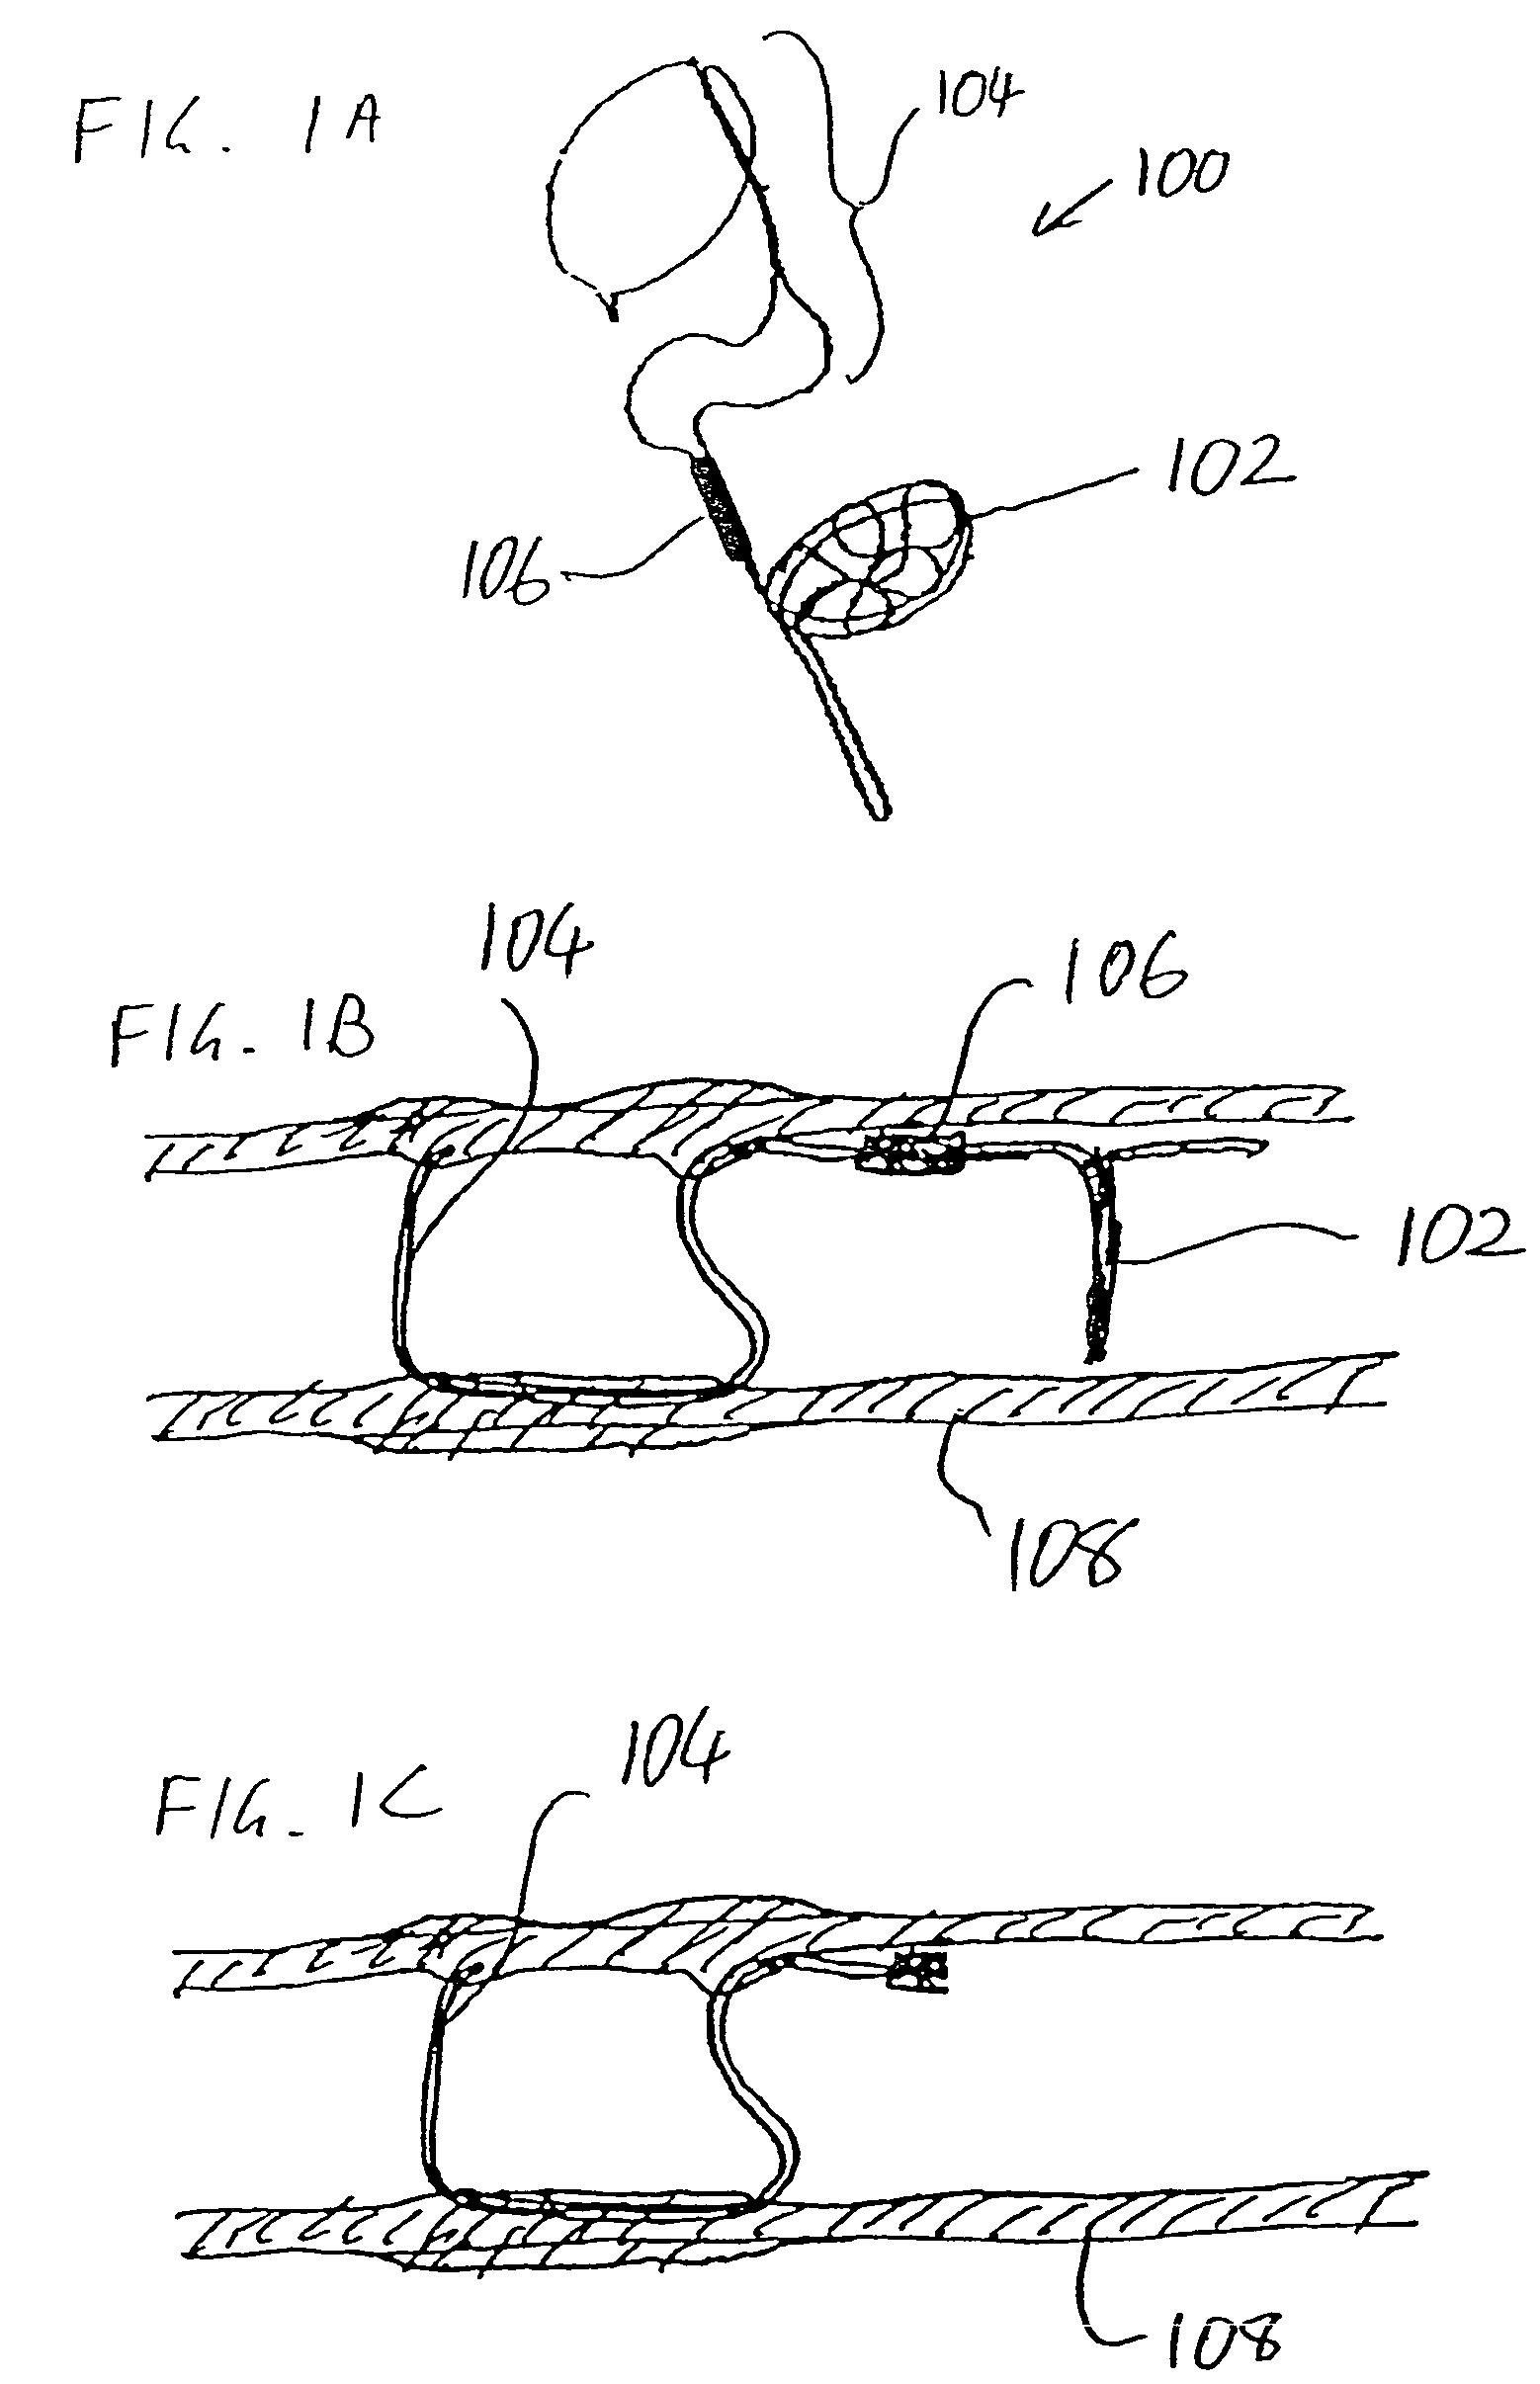 Intravascular devices, retrieval systems, and corresponding methods